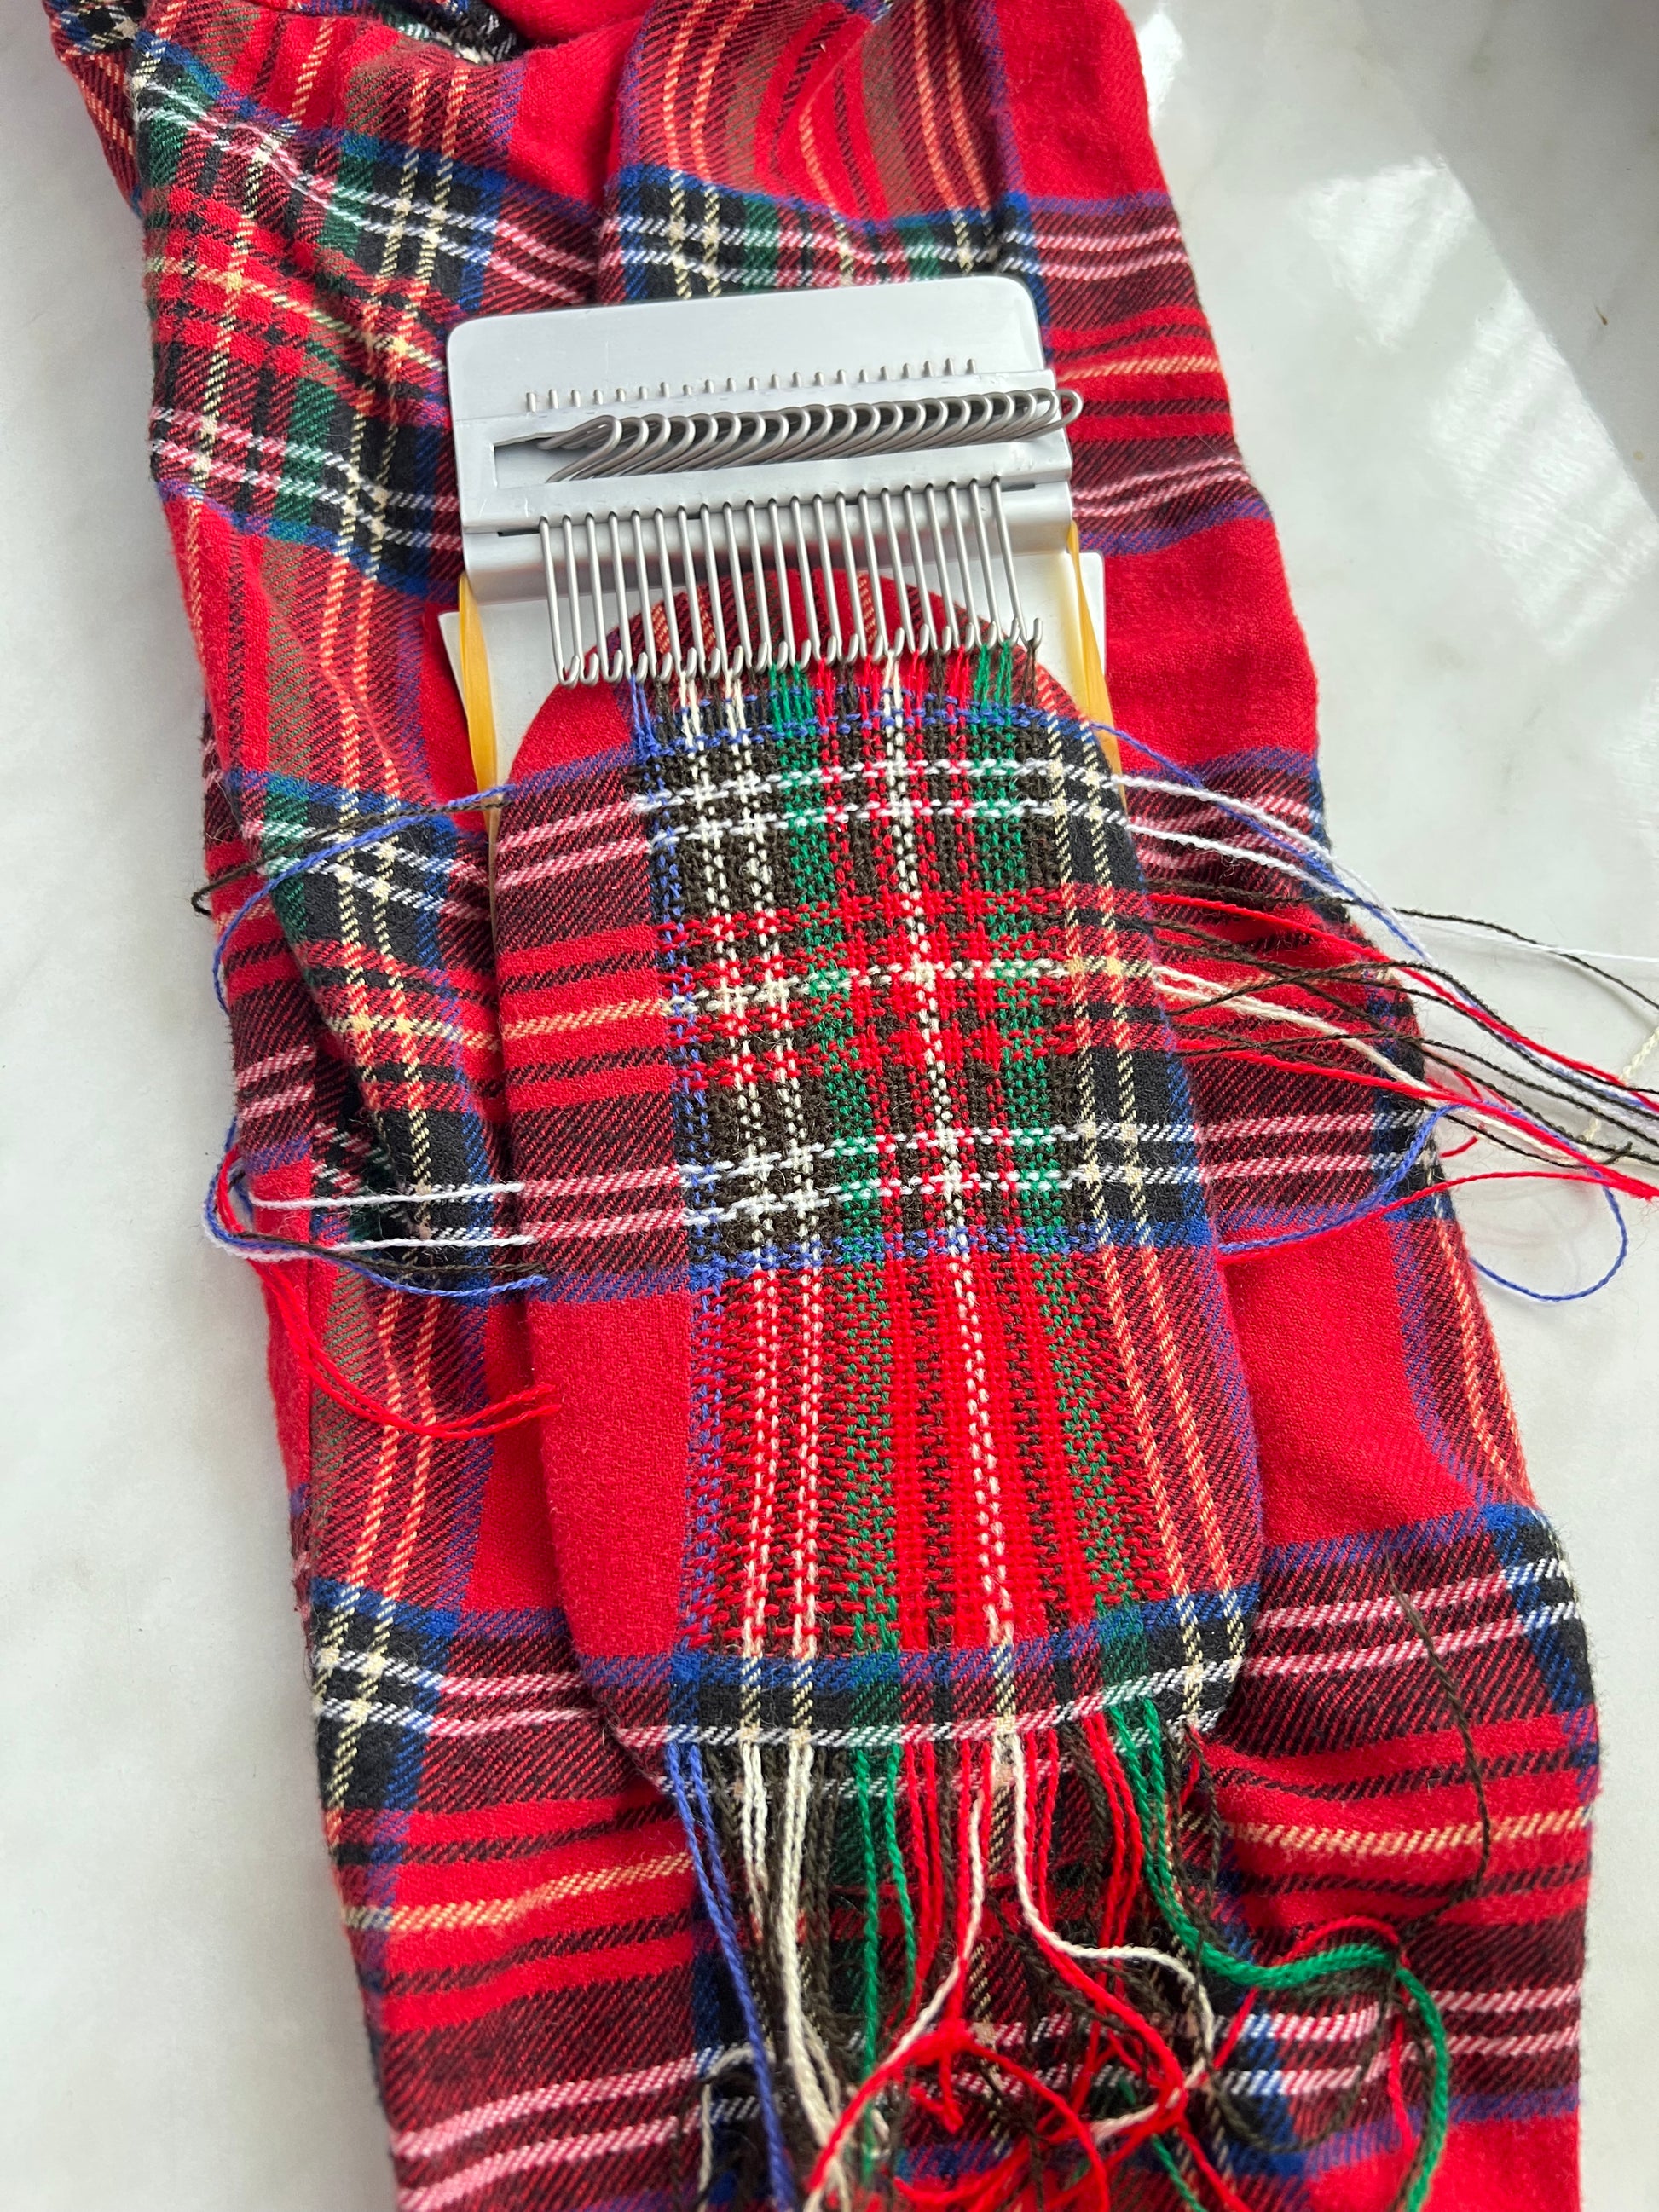 How To Use A Speedweve Loom To Mend Clothes ⋆ A Rose Tinted World